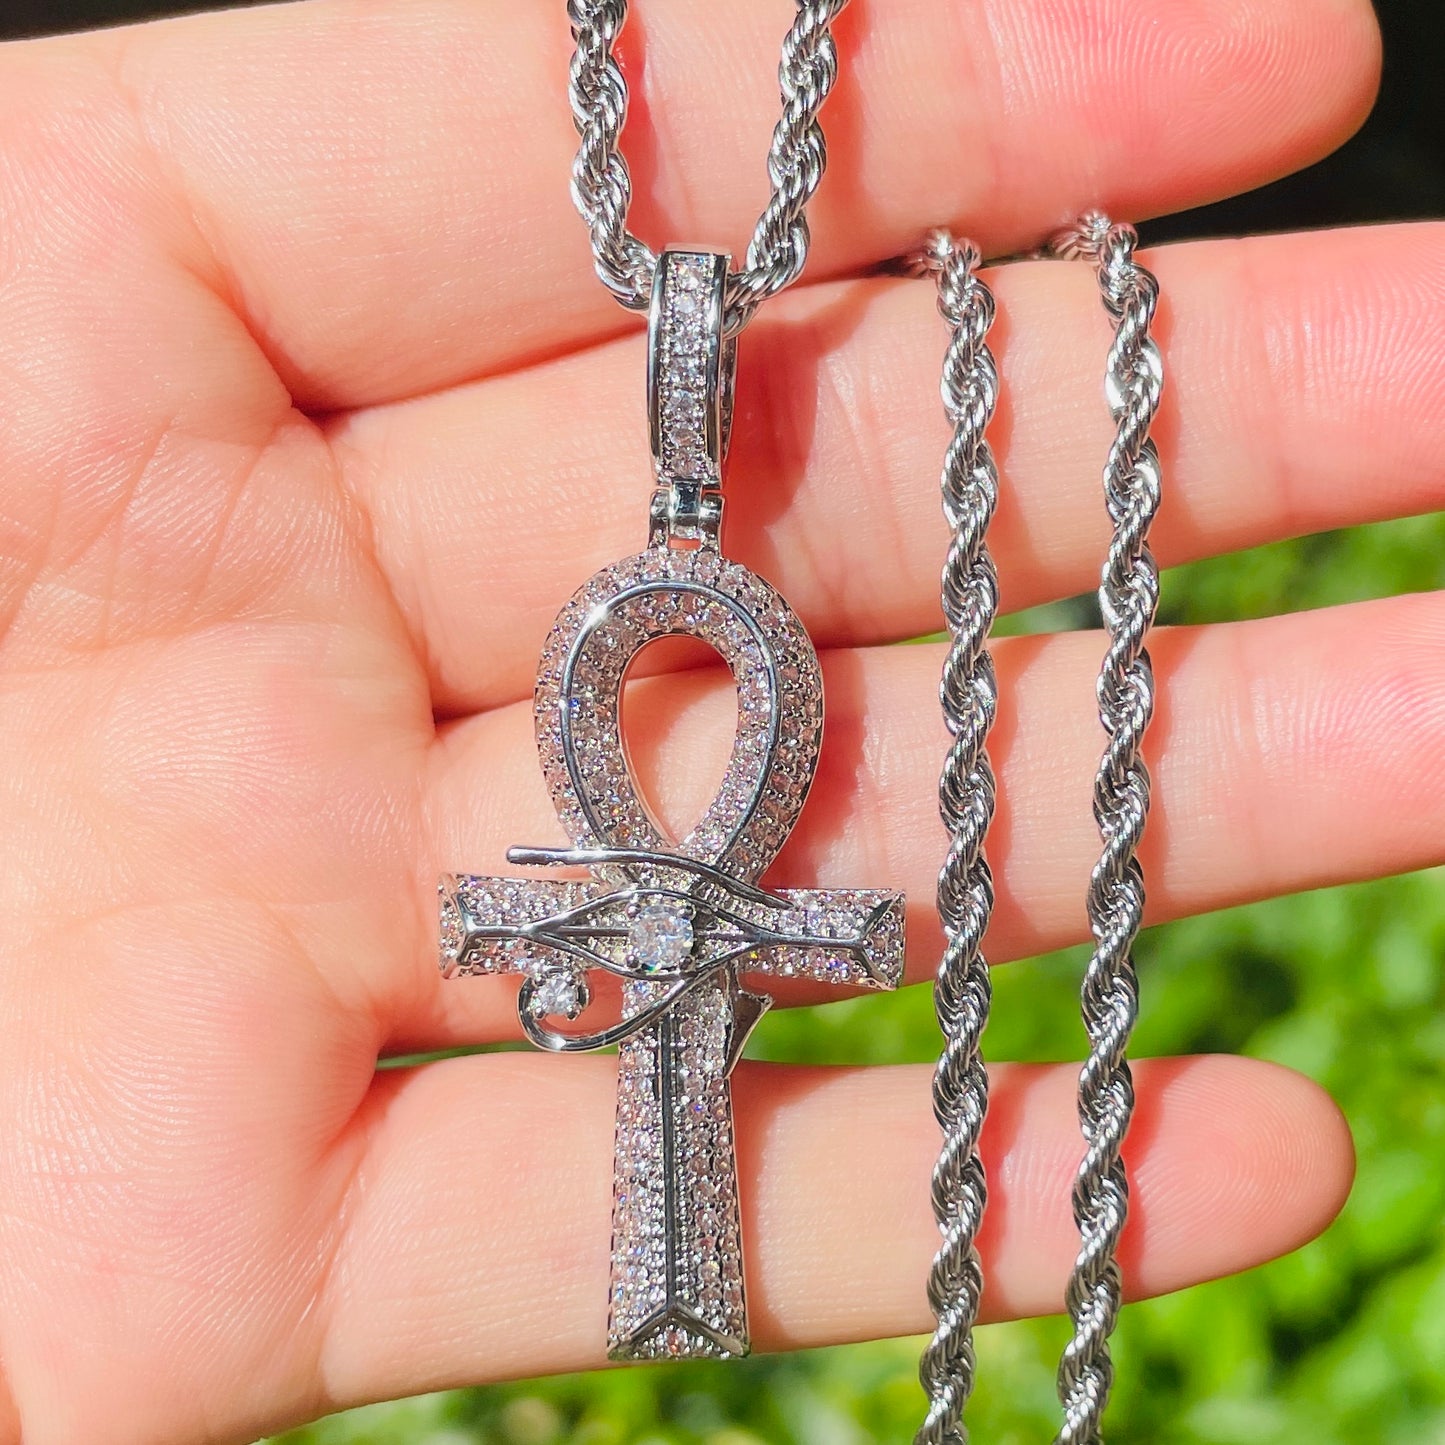 5pcs/lot 18/20/24 inch Stainless Steel Rope Chain CZ Pave Egypt Eyes of Horus ANKH Cross Necklace Silver Necklaces Charms Beads Beyond